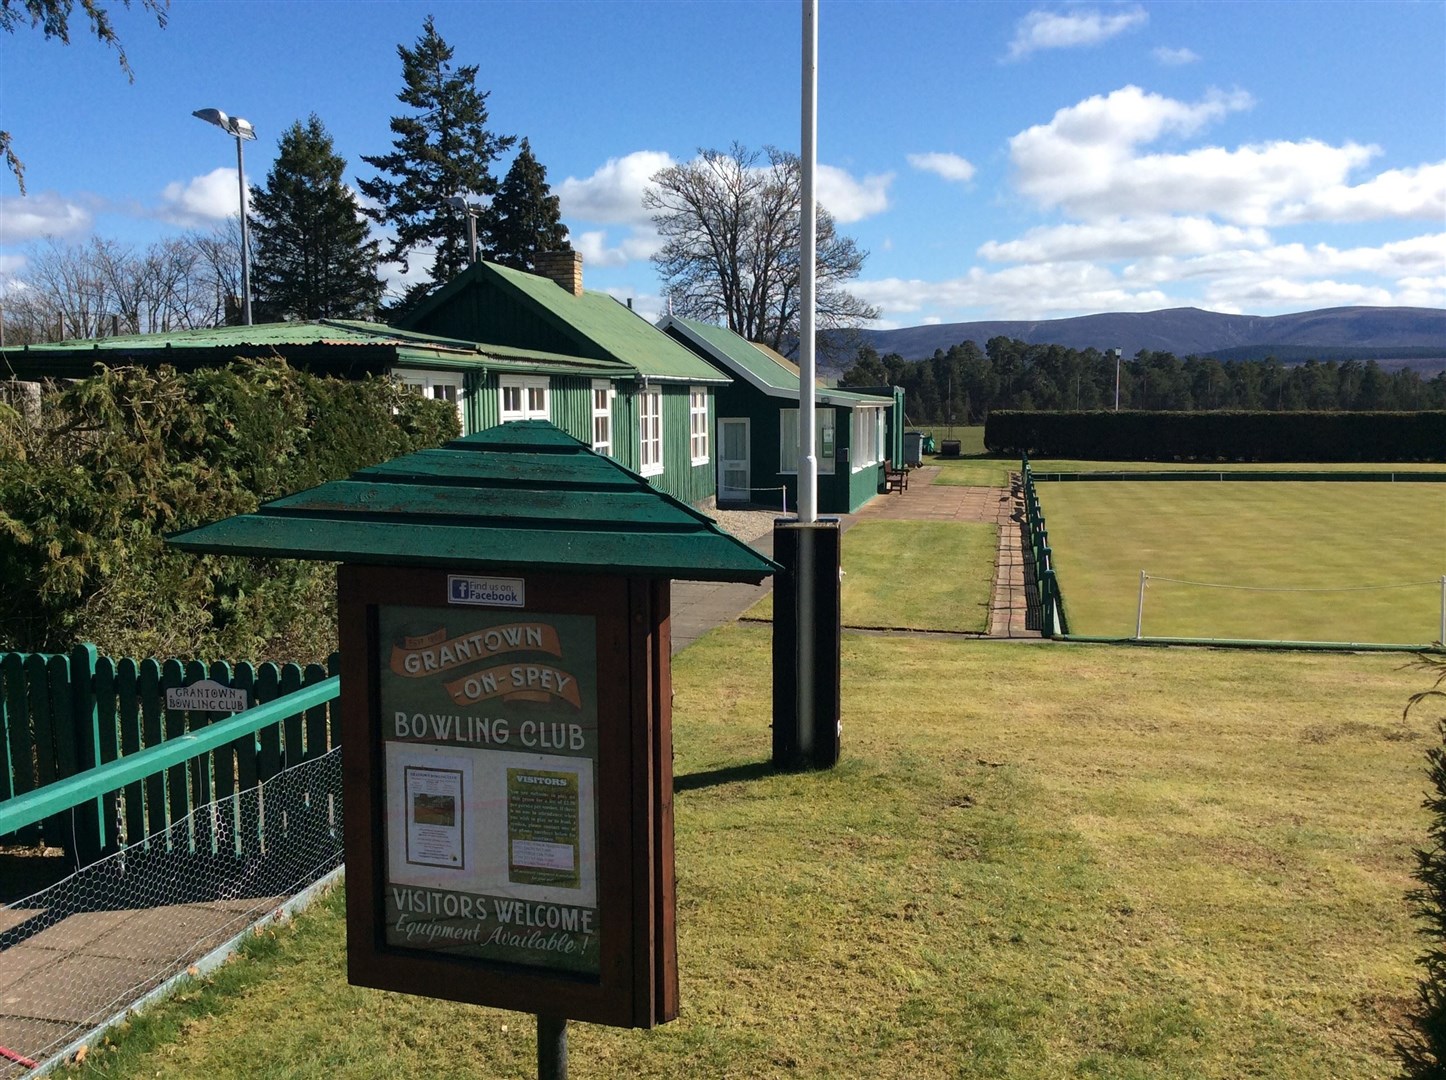 Grantown Bowling Club are facing the prospect of closure.